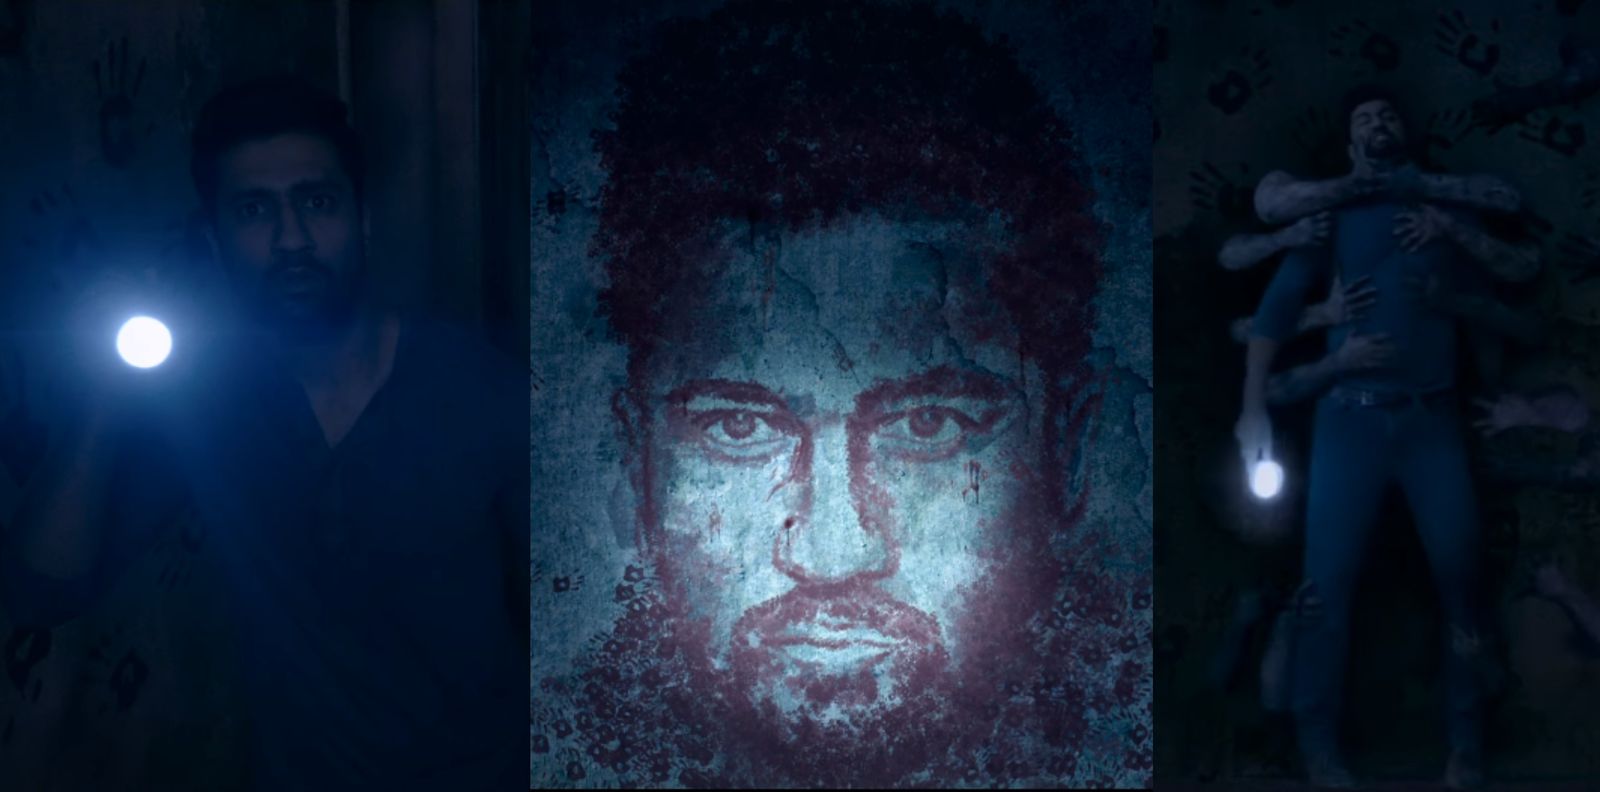  Bhoot: The Haunted Ship Teaser - Vicky Kaushal Follows A Spooky Trail Of Bloody Hands, Cries Tears Of Blood